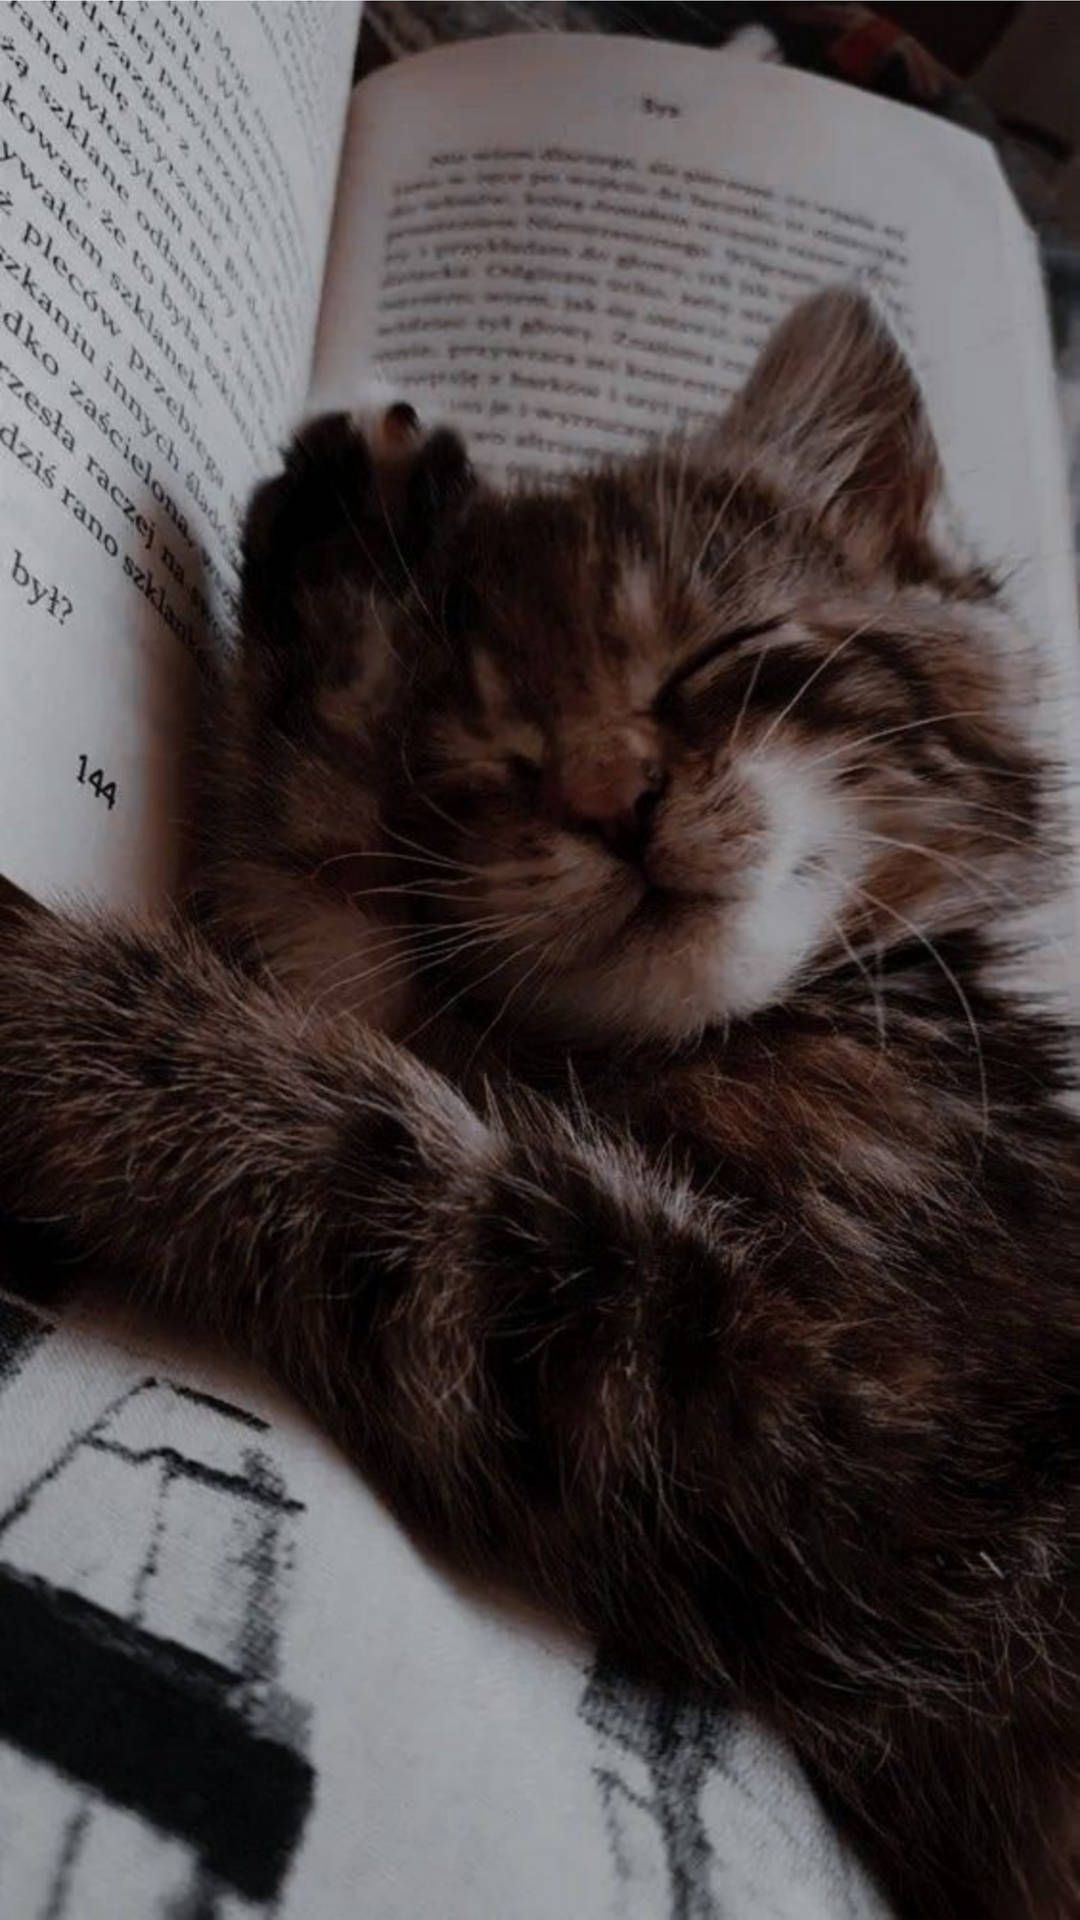 Cute Cat Aesthetic Sleeping On The Book Wallpaper